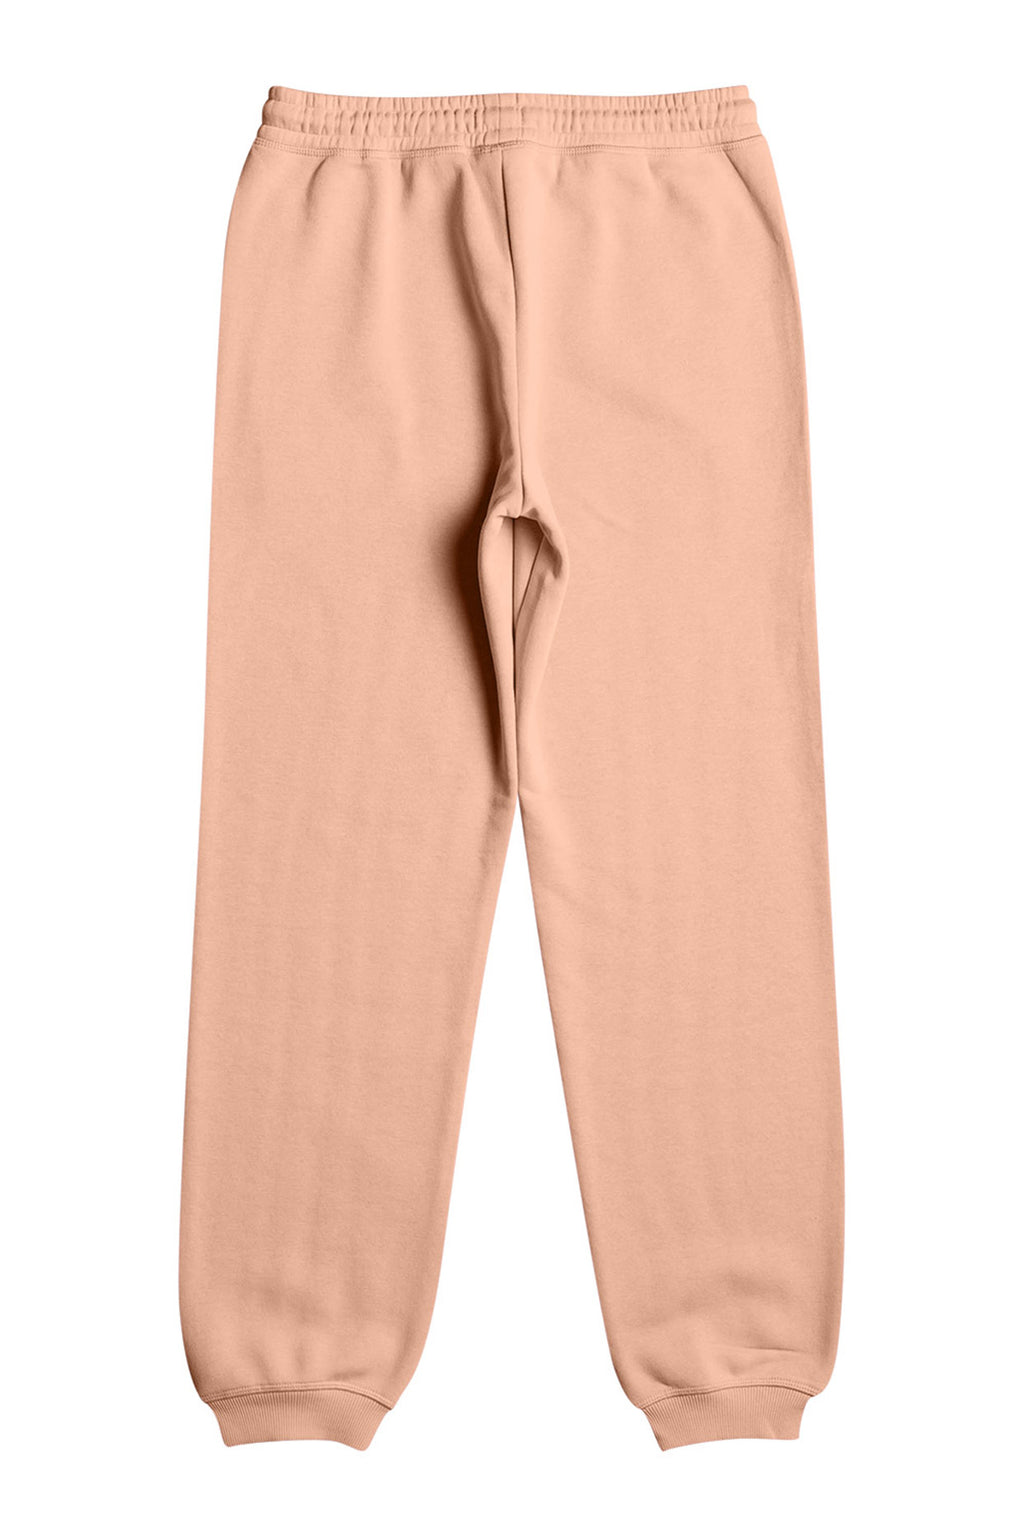 Roxy - Surf Stoked Pant